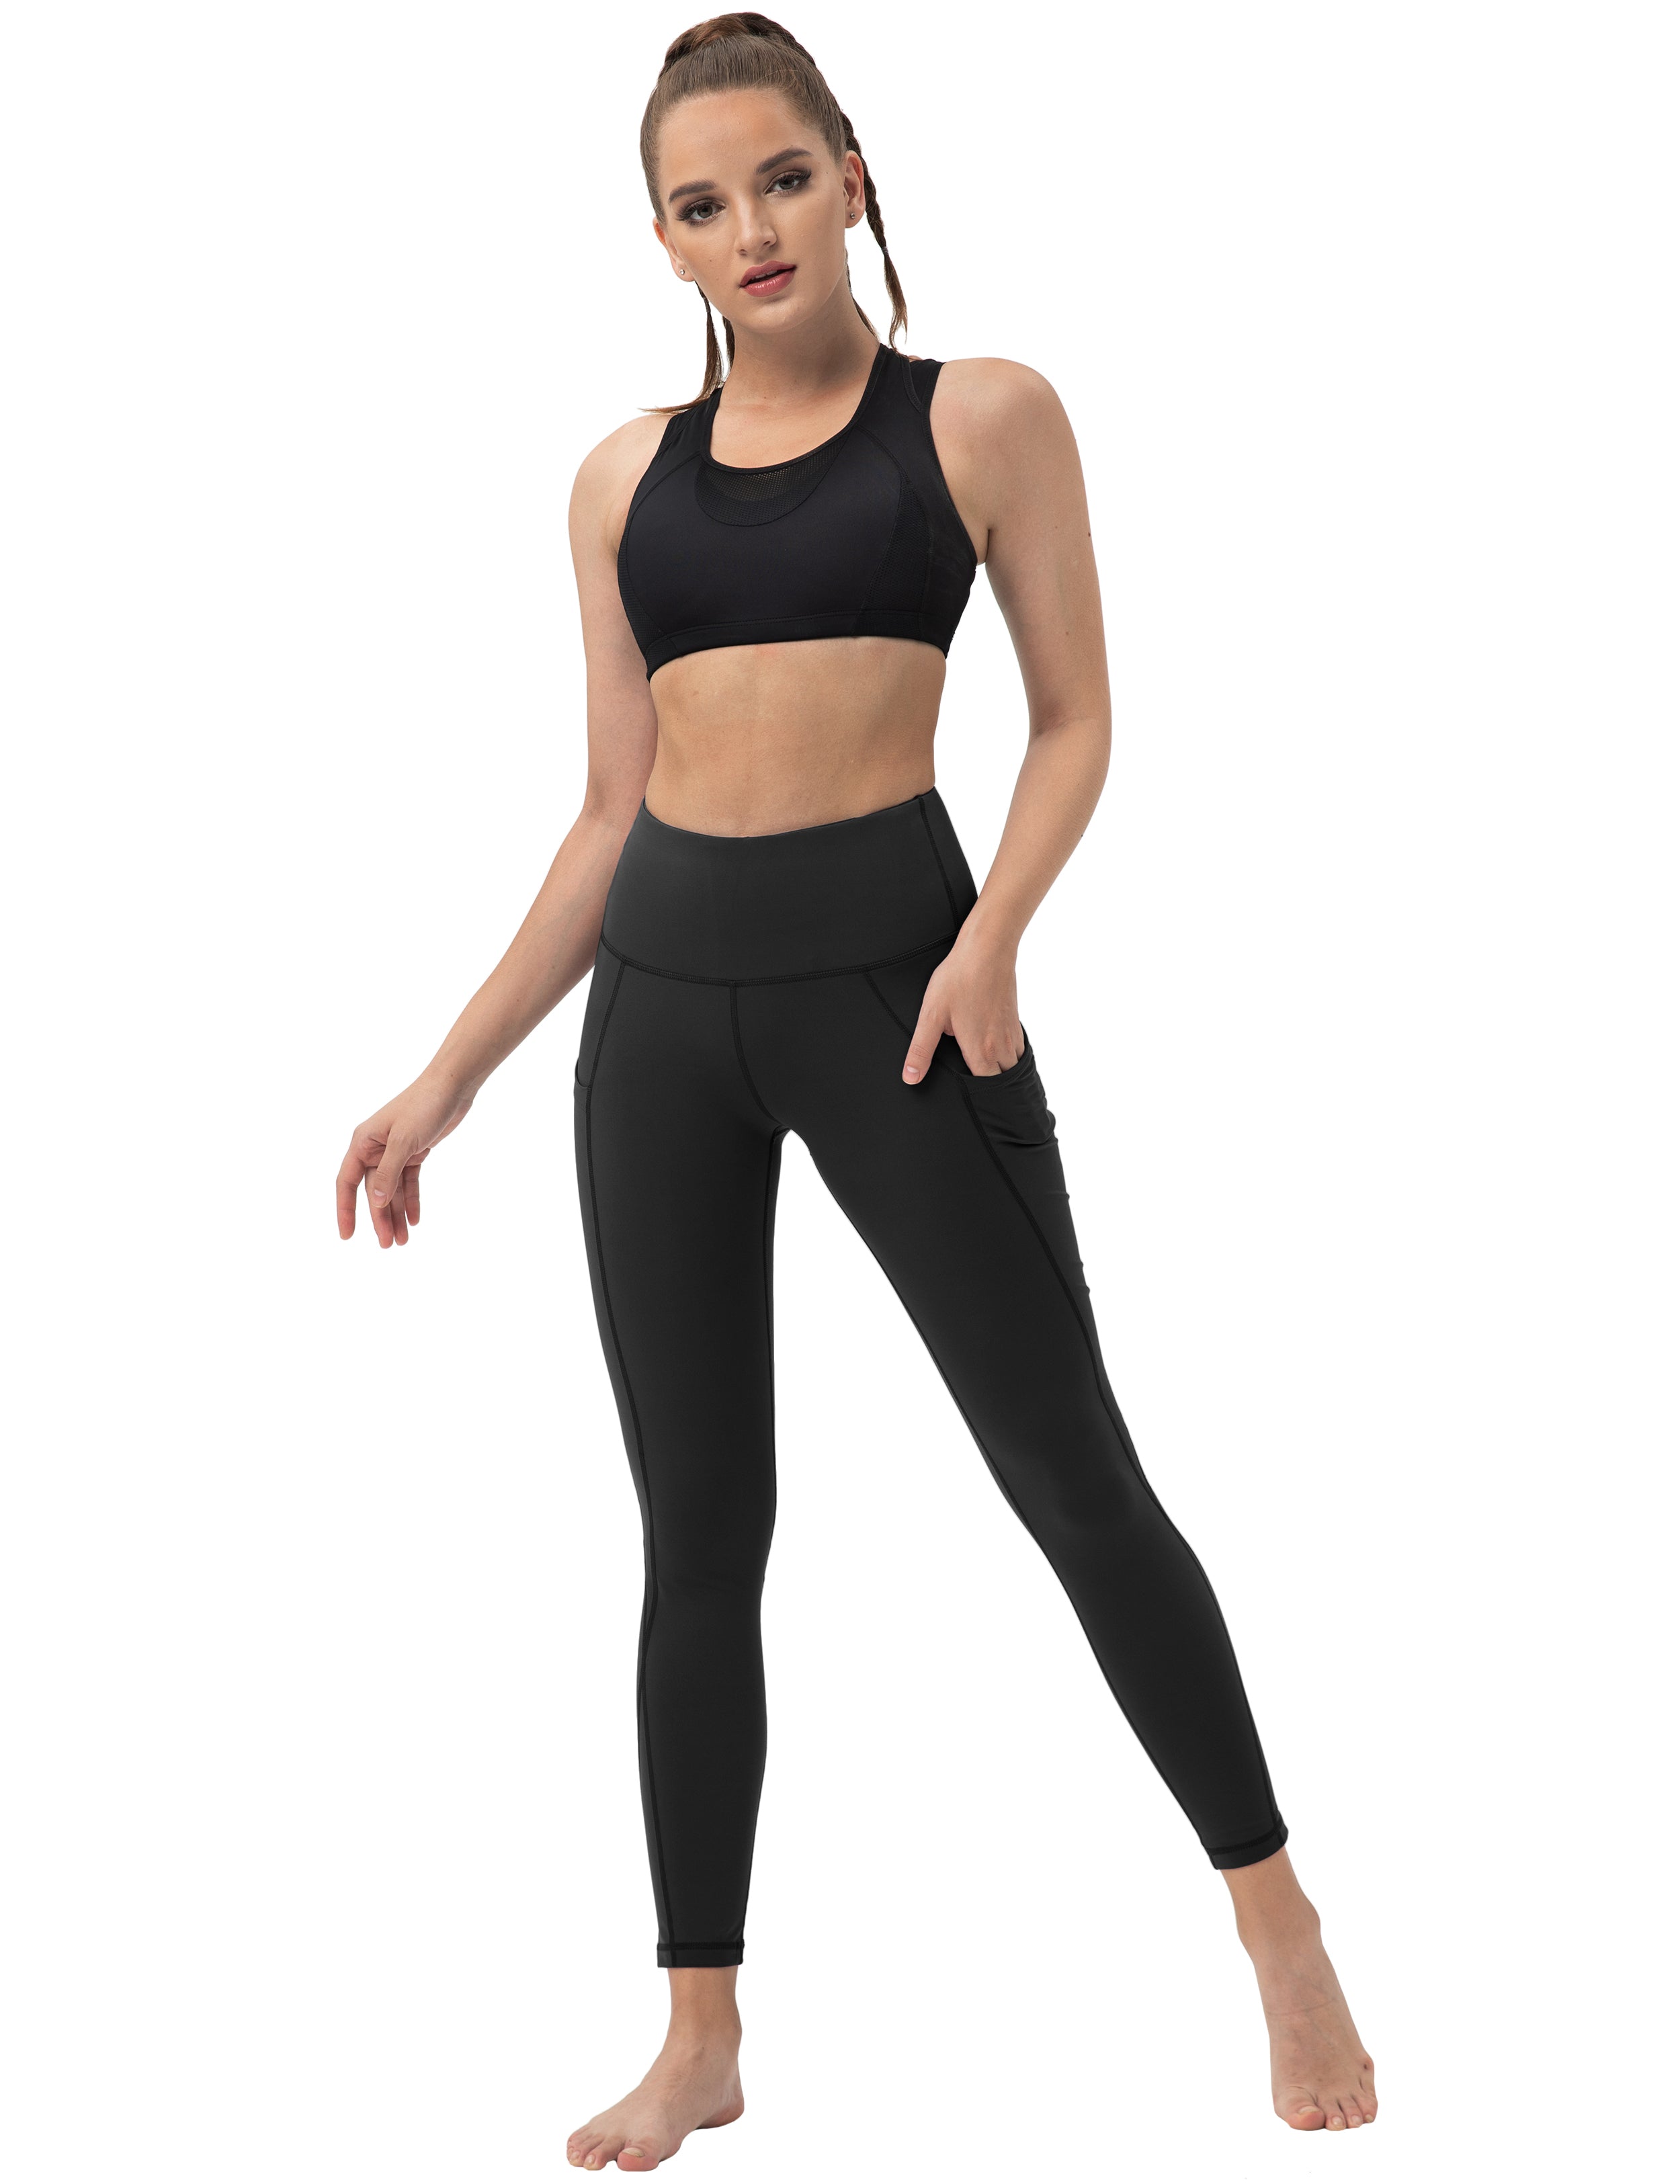 High Waist Side Pockets Gym Pants black 75% Nylon, 25% Spandex Fabric doesn't attract lint easily 4-way stretch No see-through Moisture-wicking Tummy control Inner pocket